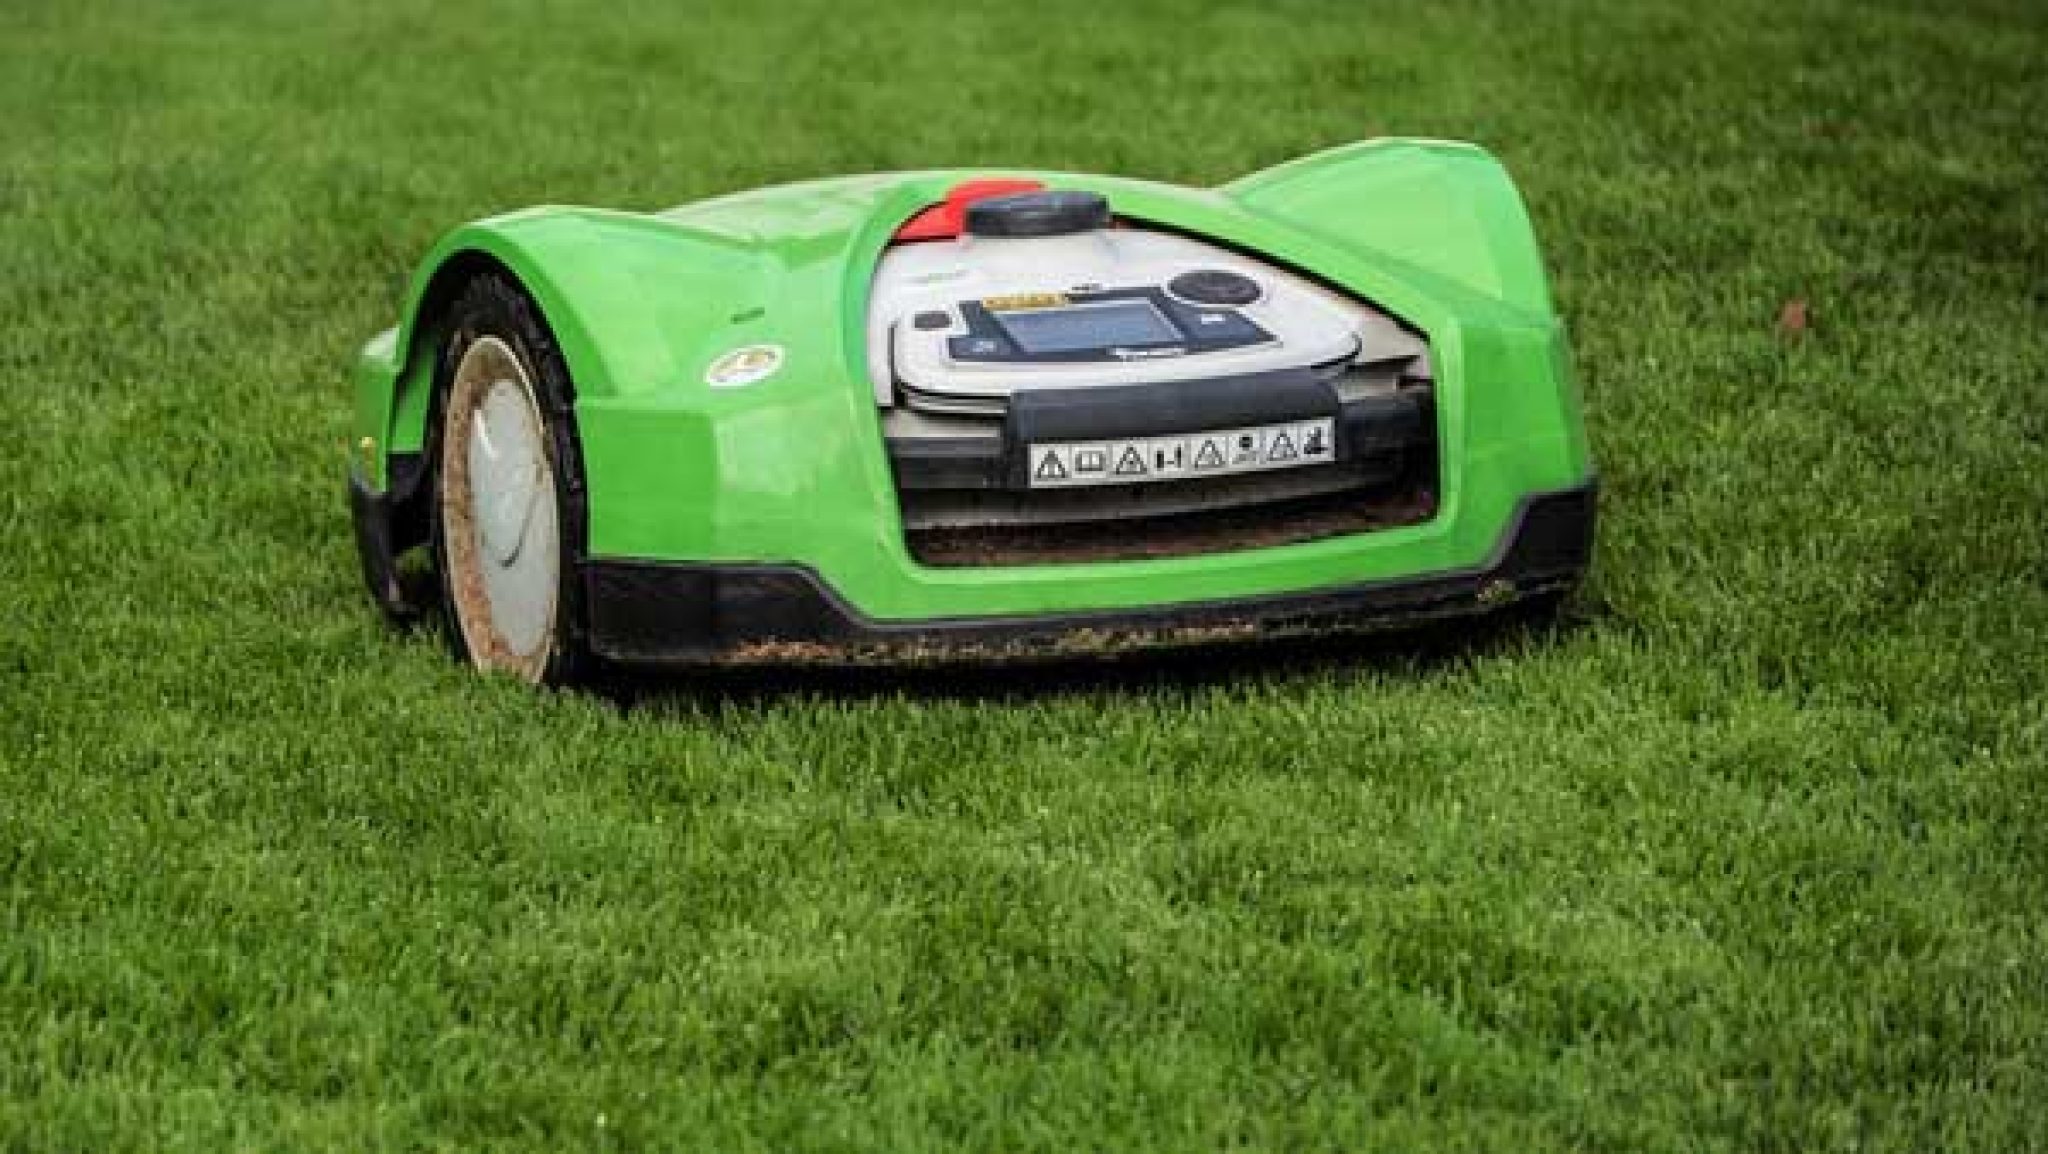 Best Robot Lawn Mowers With & Without Perimeter Wires LifeFalcon